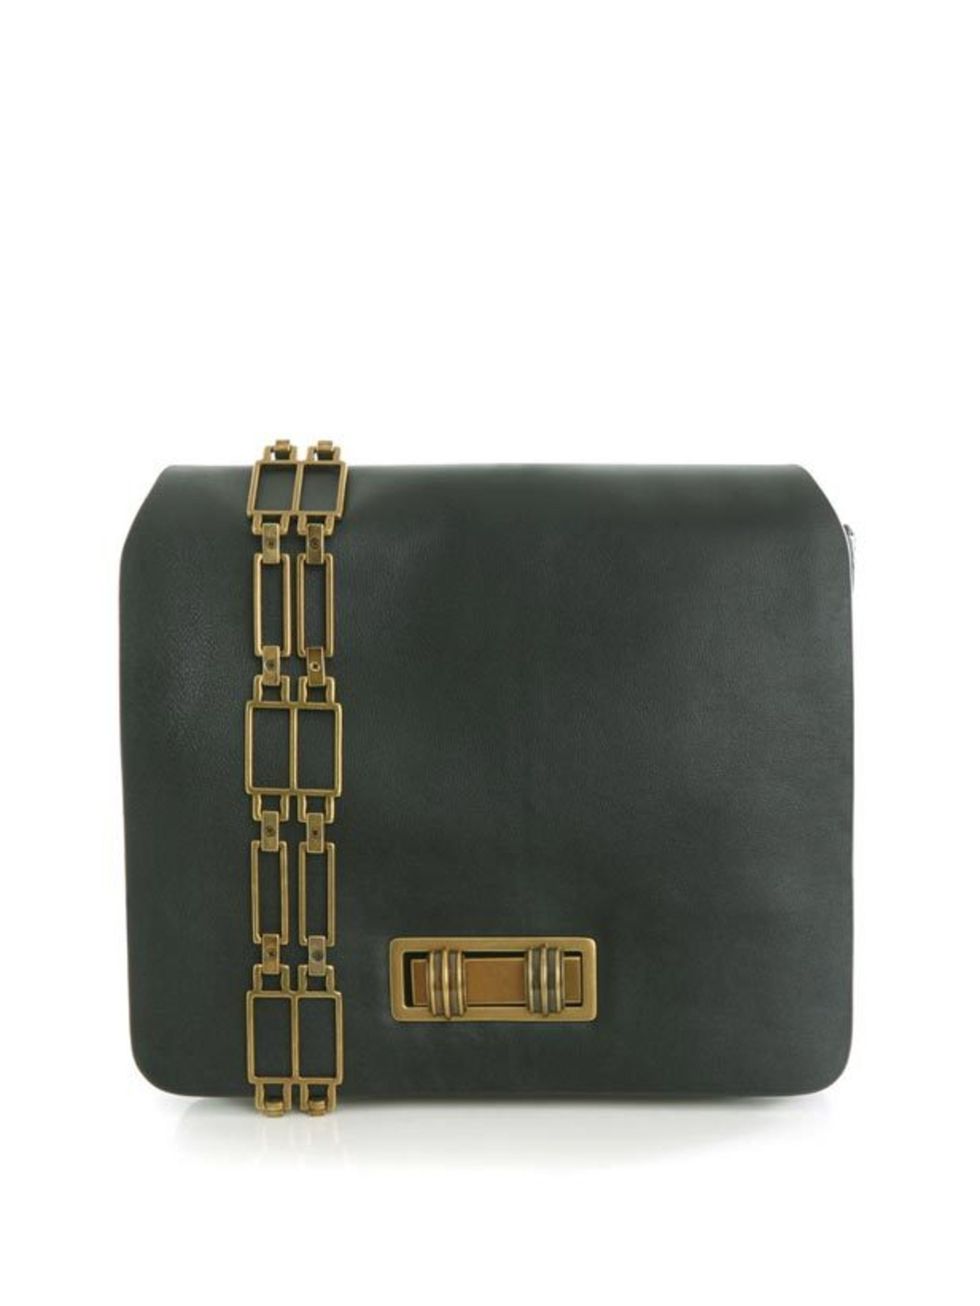 <p>Raoul green leather bag, £198, at <a href="http://www.matchesfashion.com/fcp/product/Matches-Fashion//raoul-rao-y-lrbg387-bags-DARK-GREEN/42645">Matches</a></p>